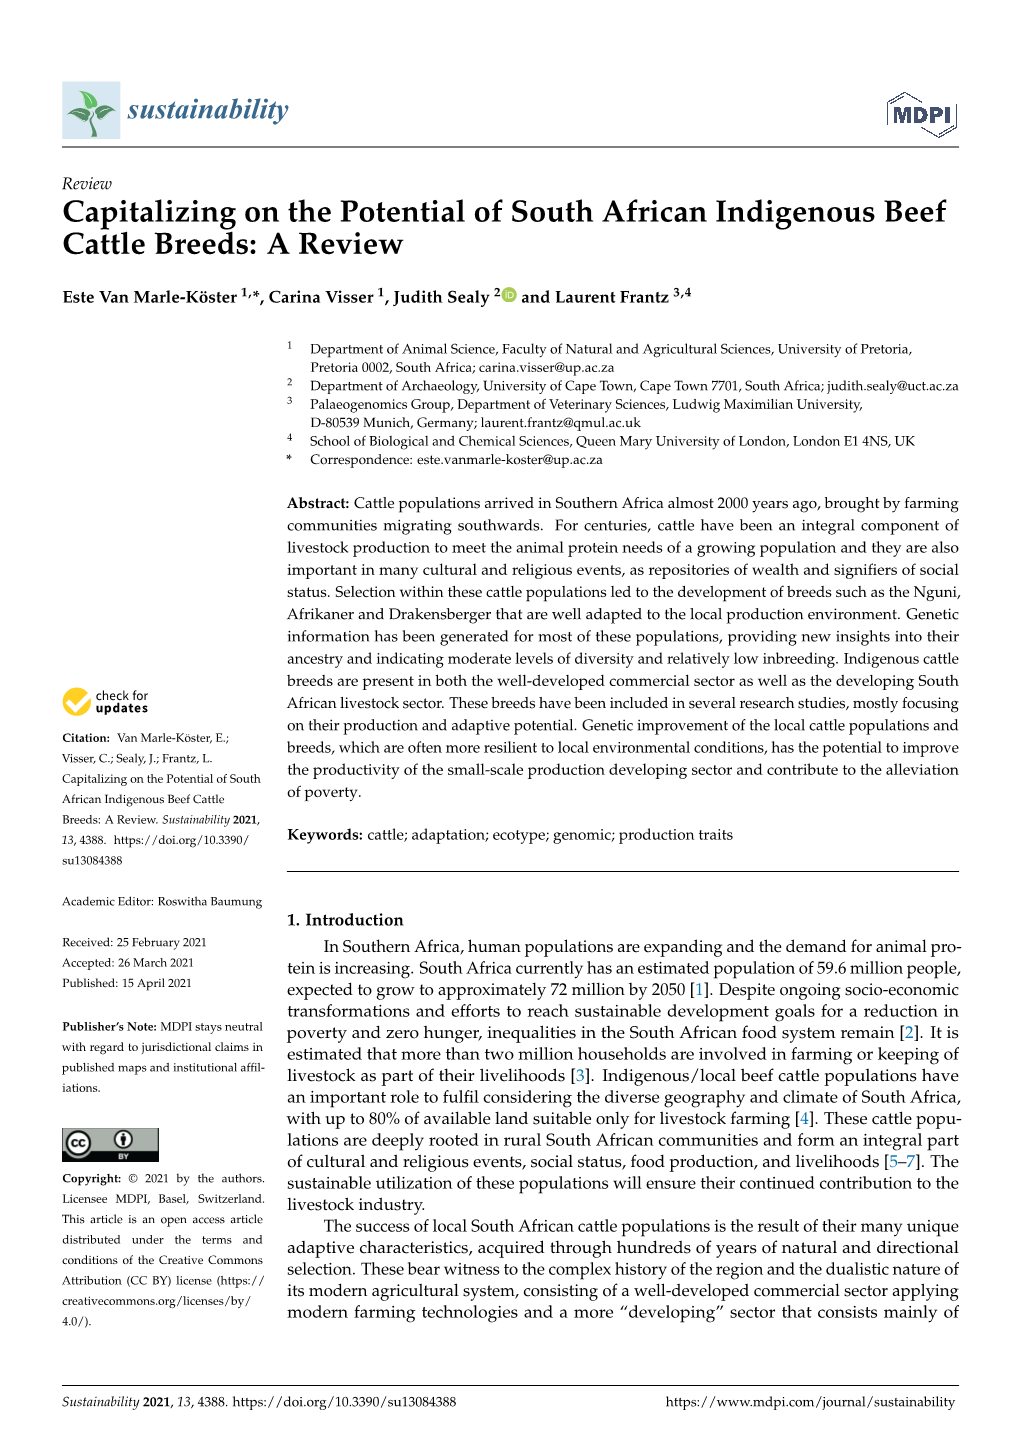 Capitalizing on the Potential of South African Indigenous Beef Cattle Breeds: a Review